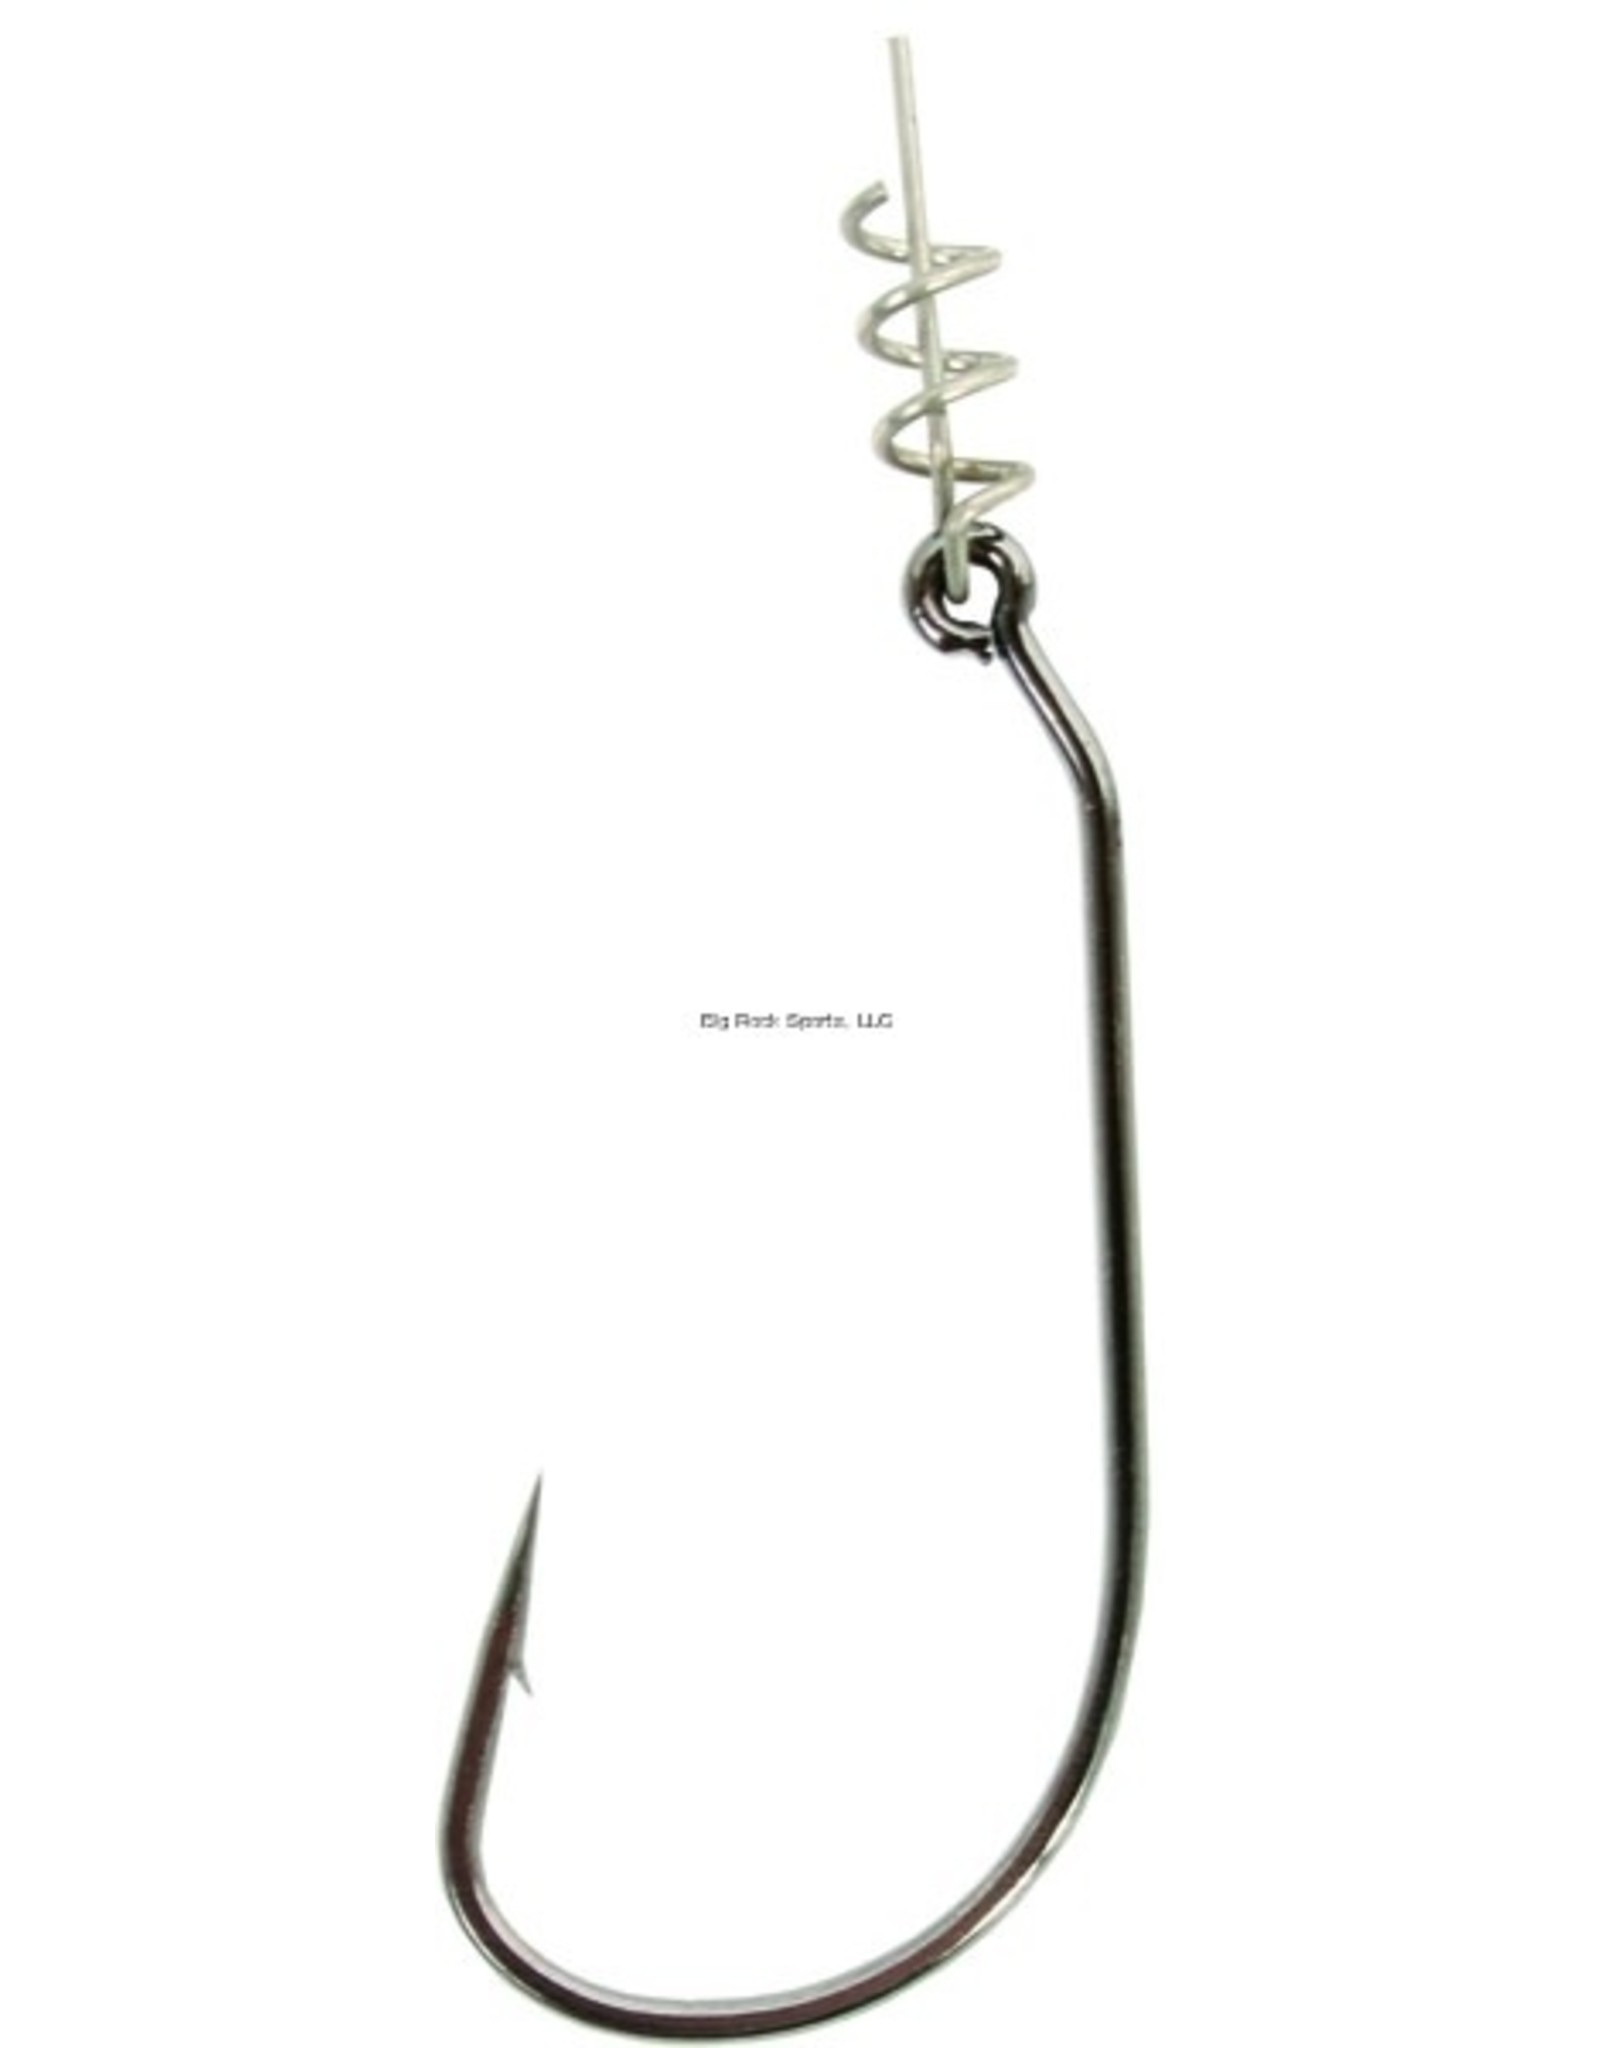 Owner Owner 5132-131 TwistLock Bass Hook with Centering-Pin Spring, Size 3/0, Needle Point, Forged Shank, 3X Strong, Black Chrome, 5 per Pack (008109)